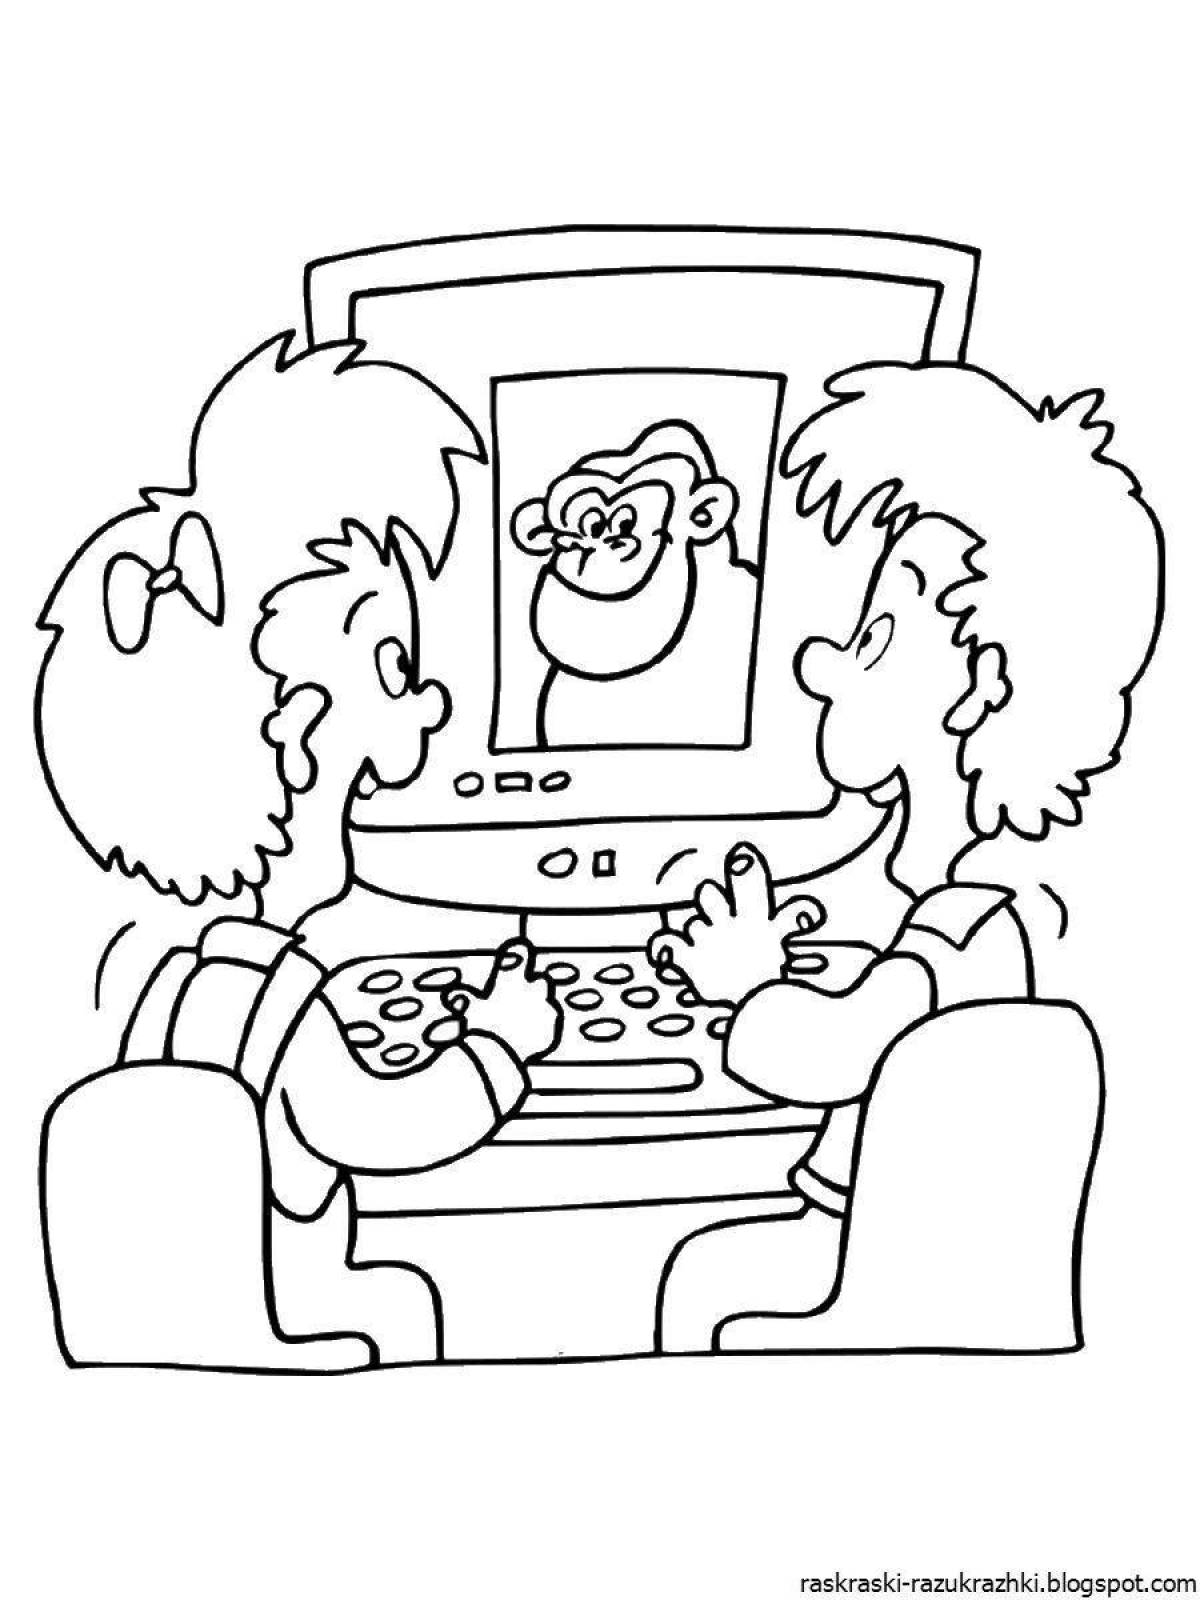 Fun safe internet coloring page